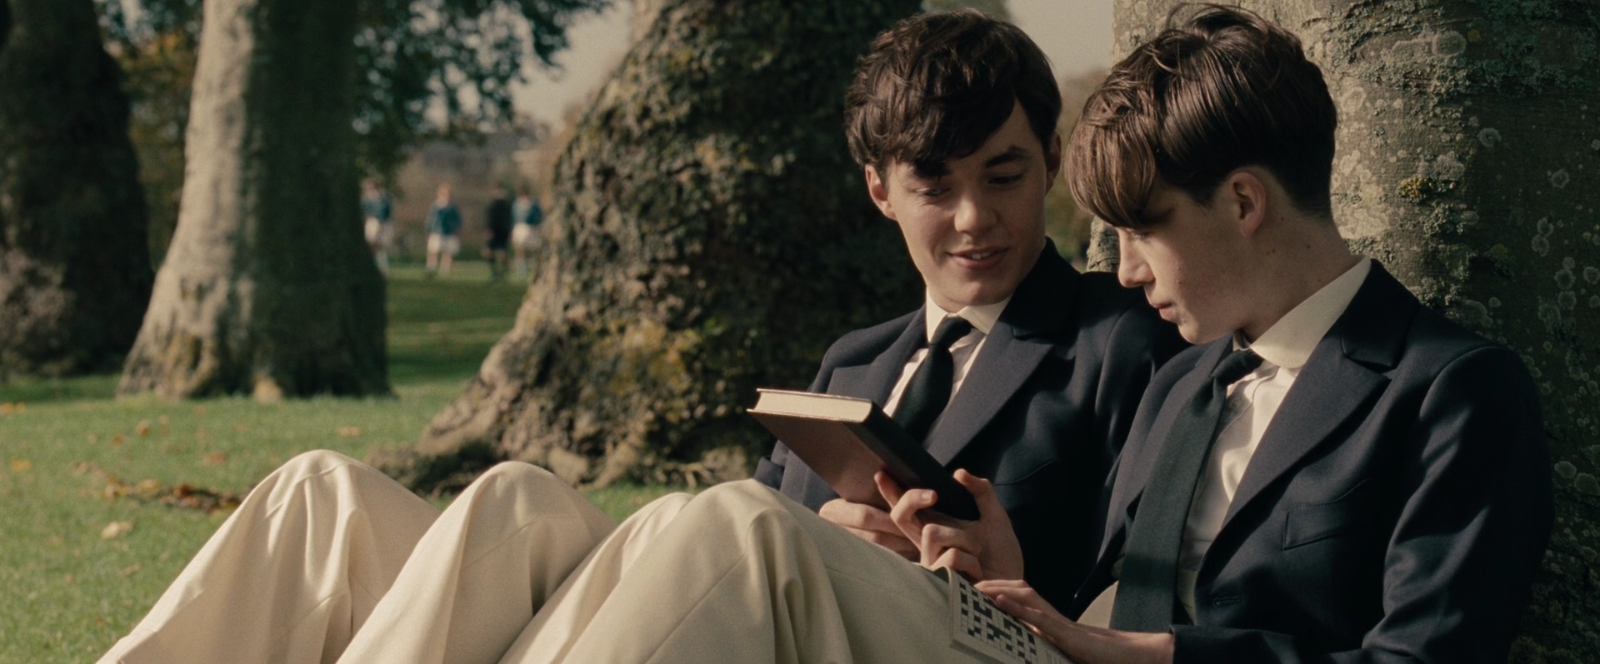 A screenshot of the movie The Imitation Game, showing a young Alan Turing (played by Alex Lawther) and his friend Christopher Morcom (portrayed by Jack Bannon). They are sitting against a tree, and Christopher is handing Alan a book.